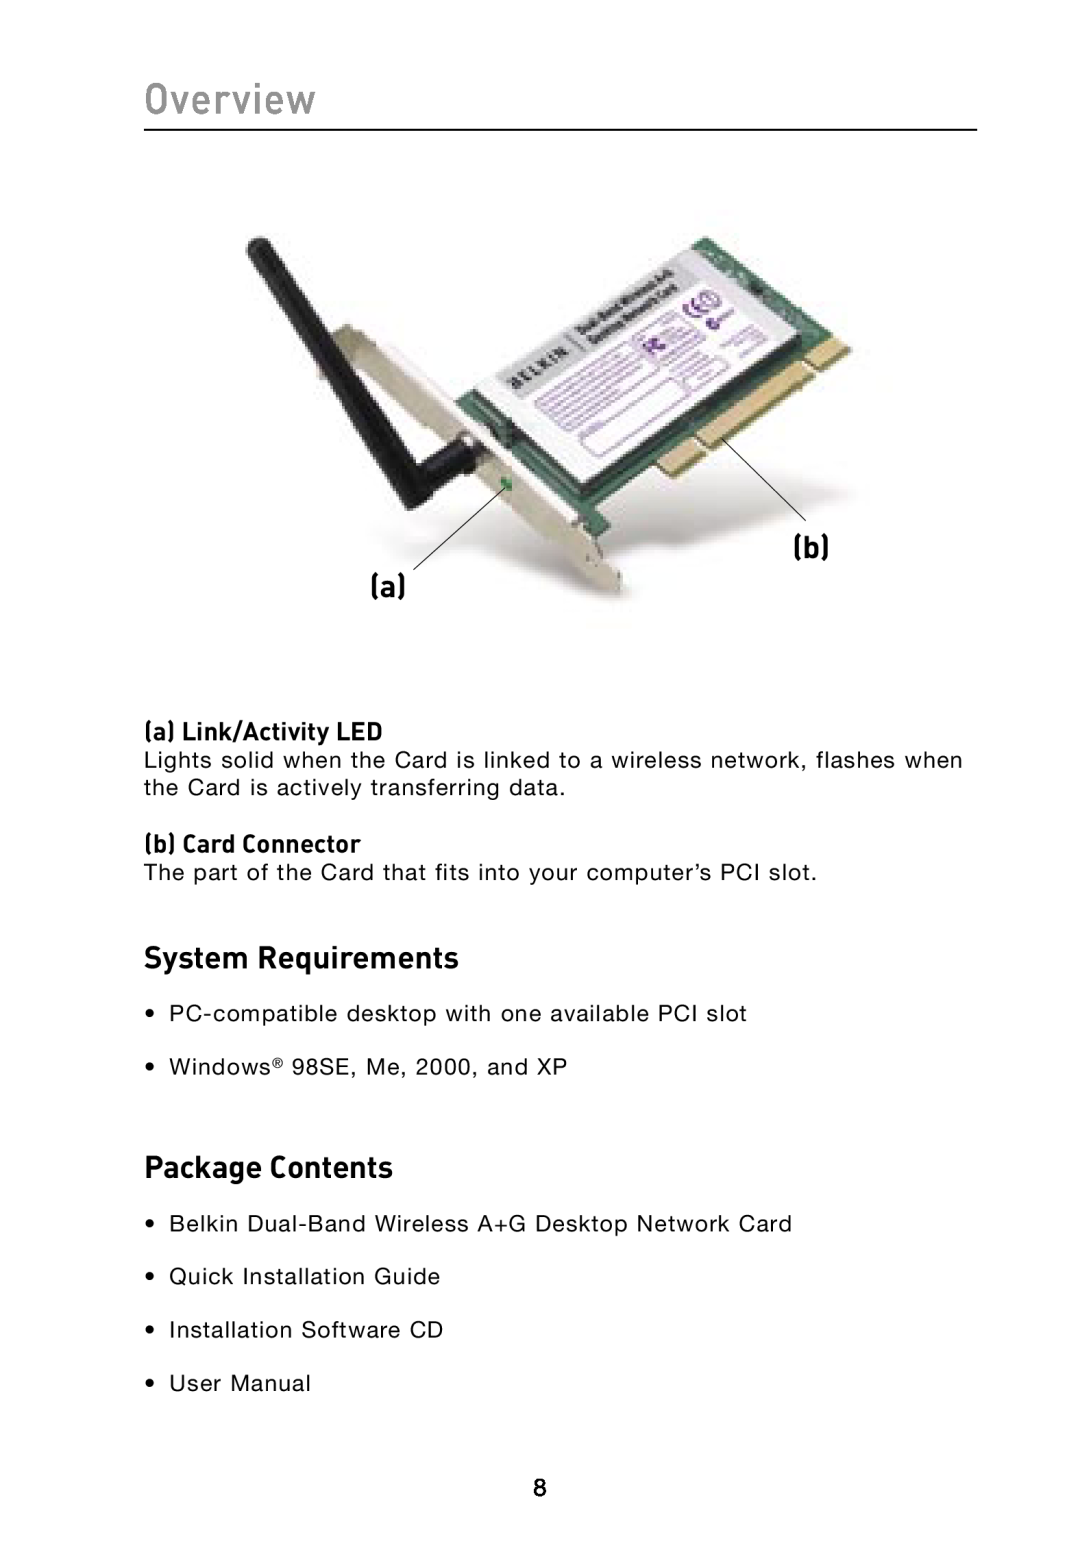 Belkin F6D3000 user manual Overview, System Requirements, Package Contents, a Link/Activity LED, b Card Connector 